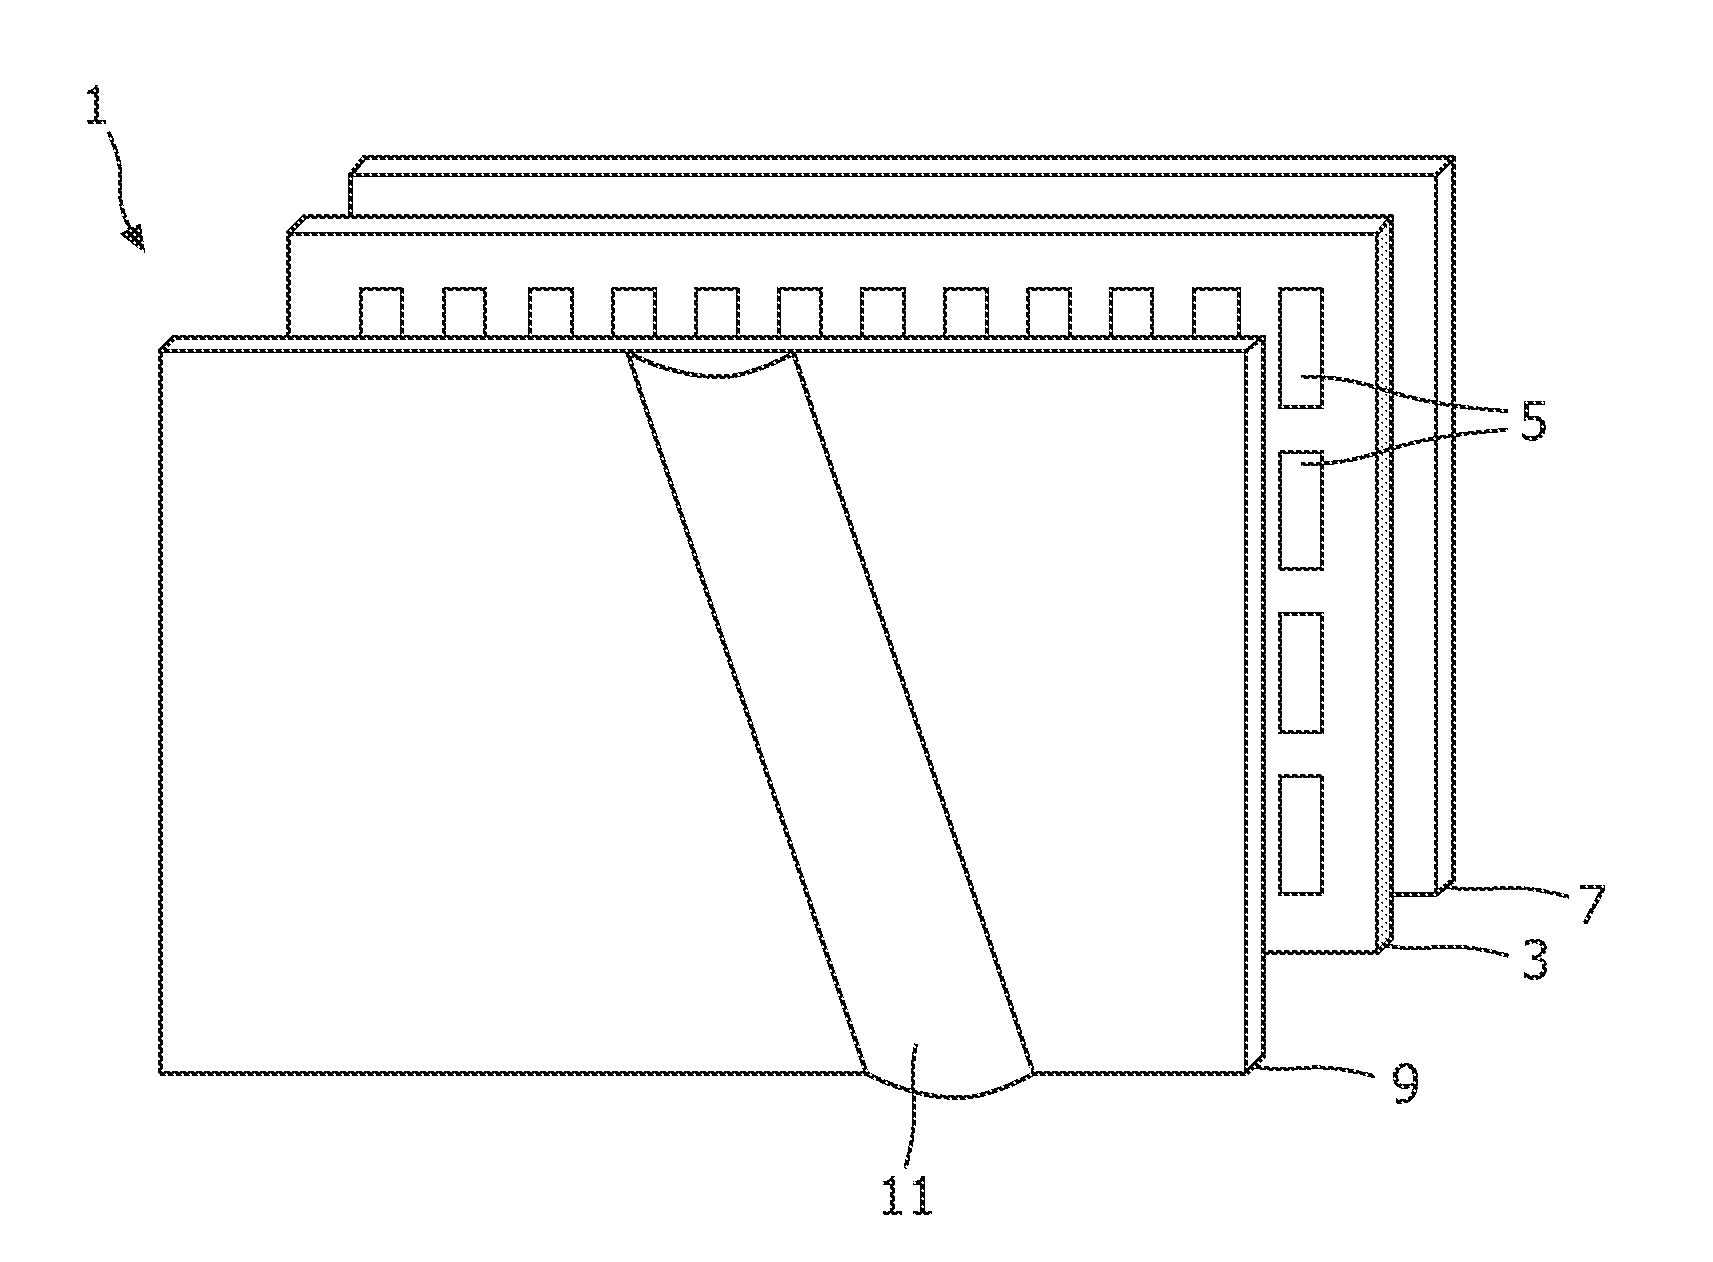 Autostereoscopic image output device